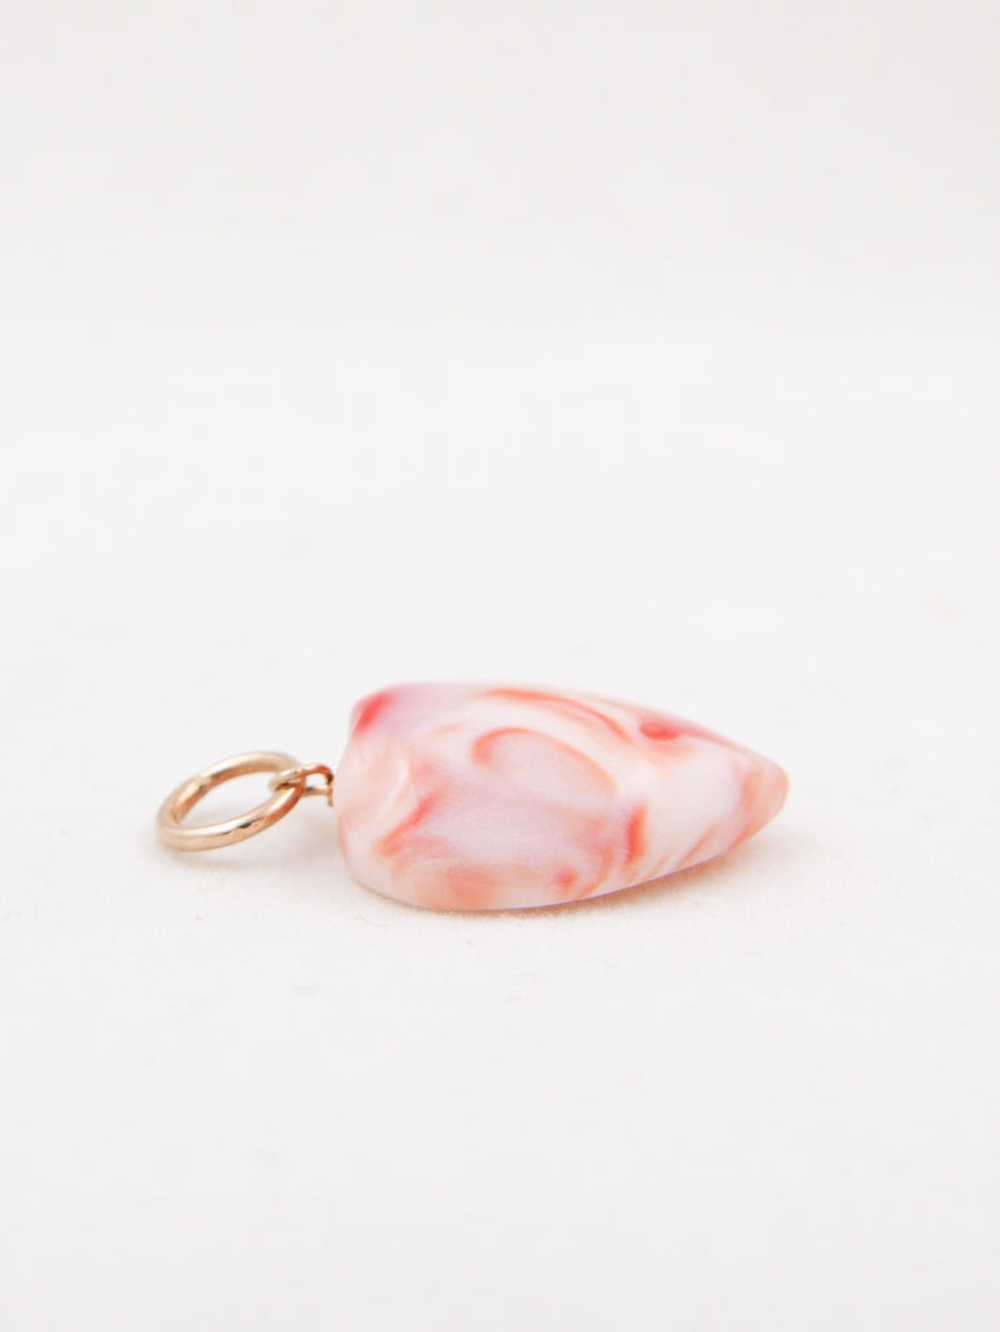 Carved Coral Heart Charm - image 3